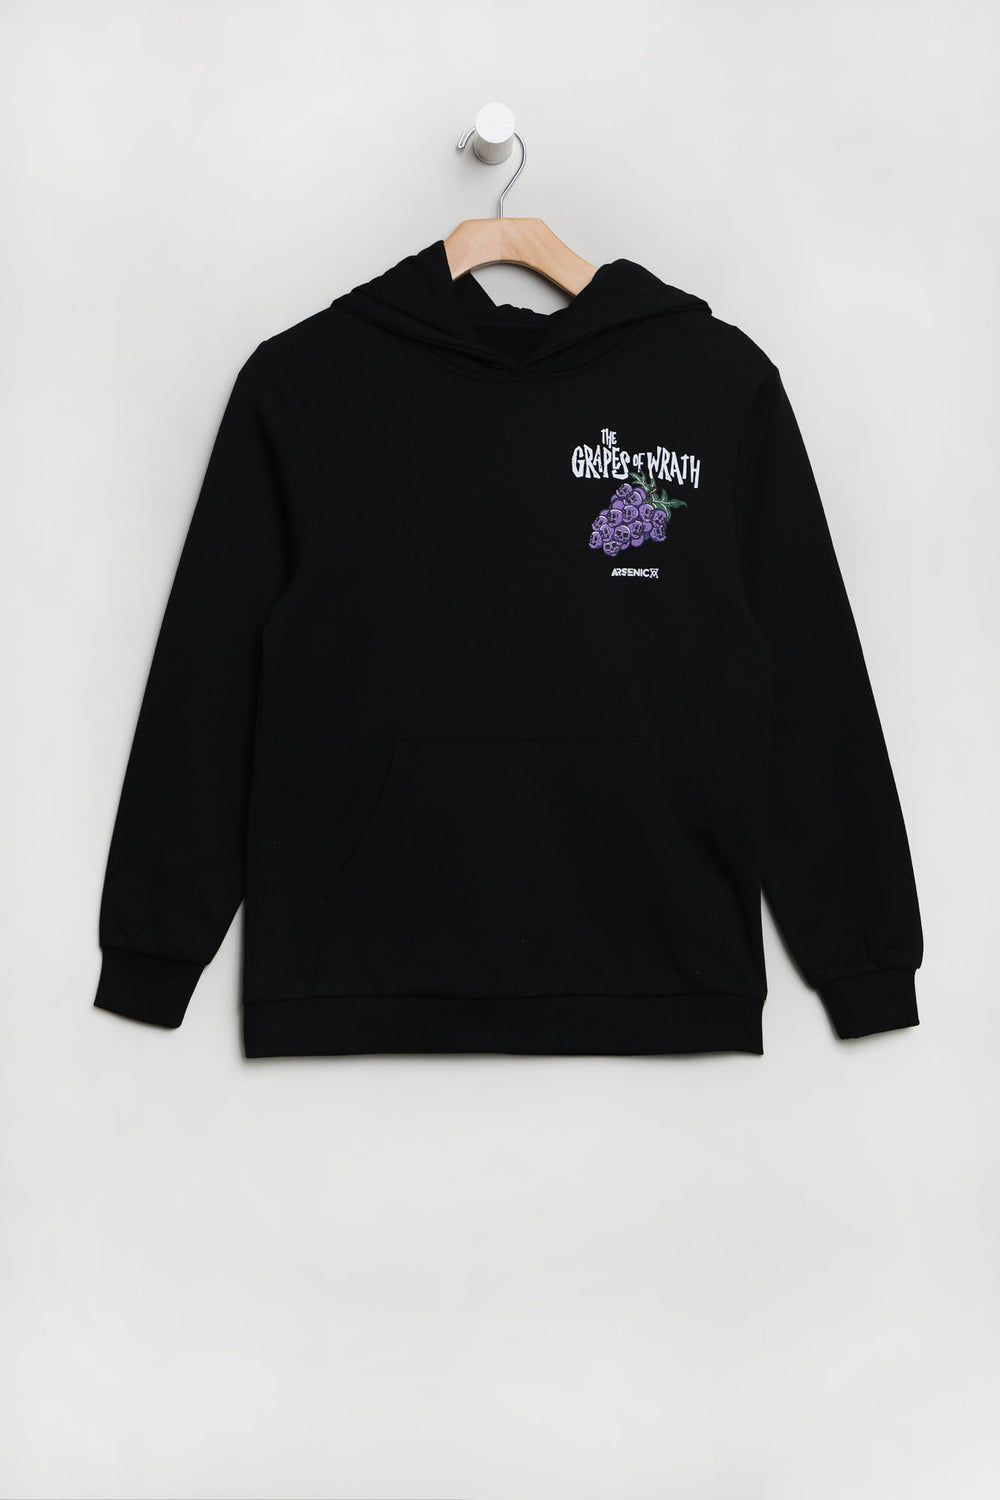 Arsenic Youth Grapes of Wrath Hoodie Arsenic Youth Grapes of Wrath Hoodie